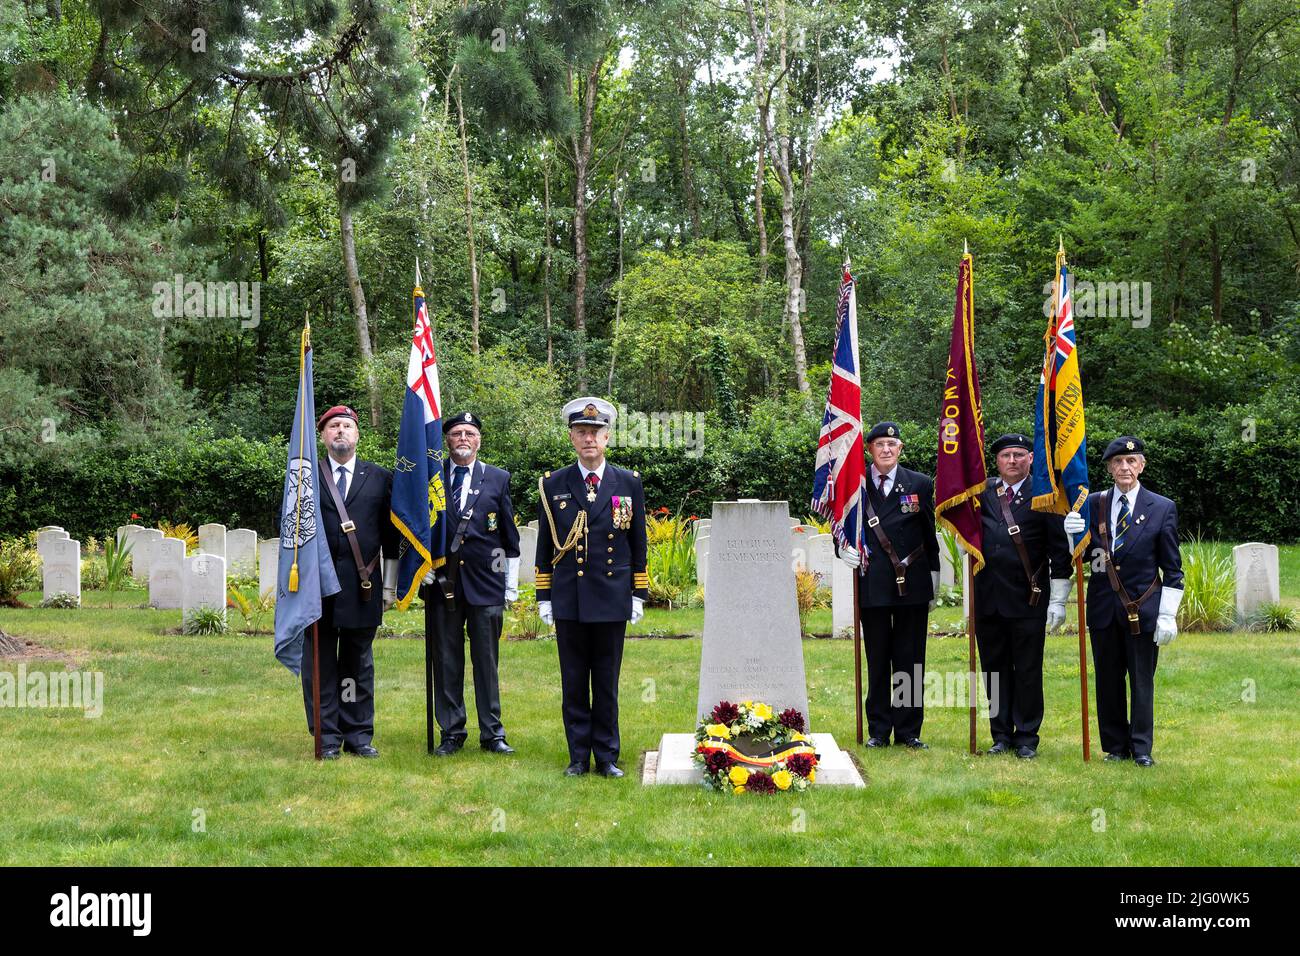 Sun 3rd July 22.Captain (Naval) Flamant, Belgian Defence Attaché having placed the Belgian Ambassador's wreath at the WW2 Memorial stands with Standard Bearers to honour the Belgian fallen interred in graves shown in the background. Extreme left - Edward Jones of  the educational charity The Trench Experience bears the Artists Rifles Standard. Stock Photo